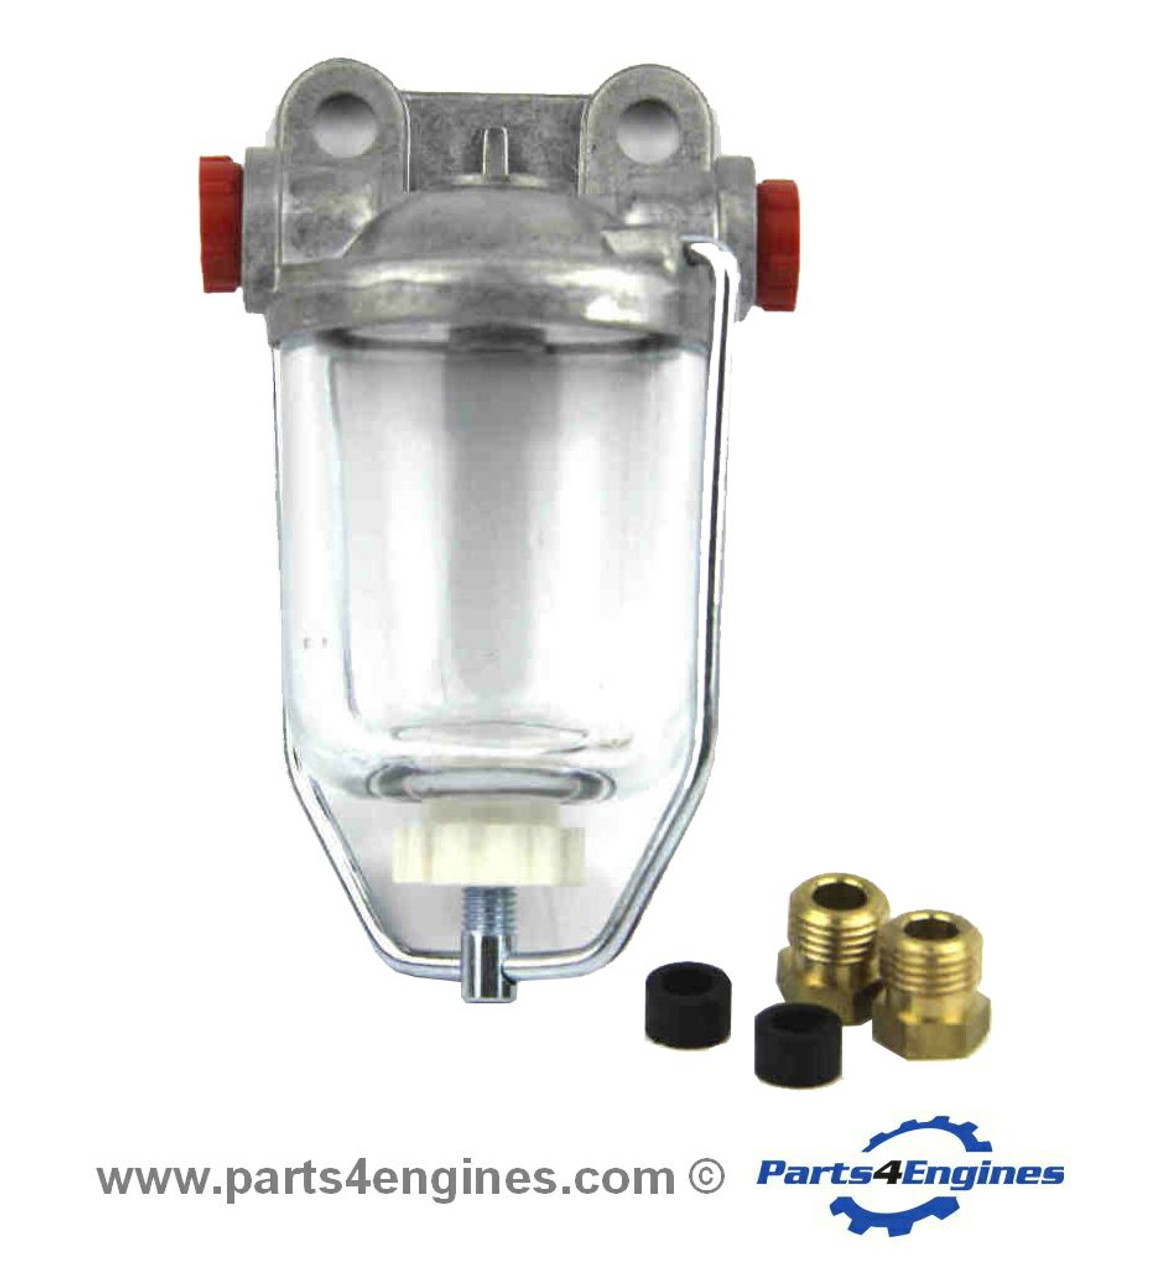 Perkins 200 series Fuel pre-filter from parts4engines.com